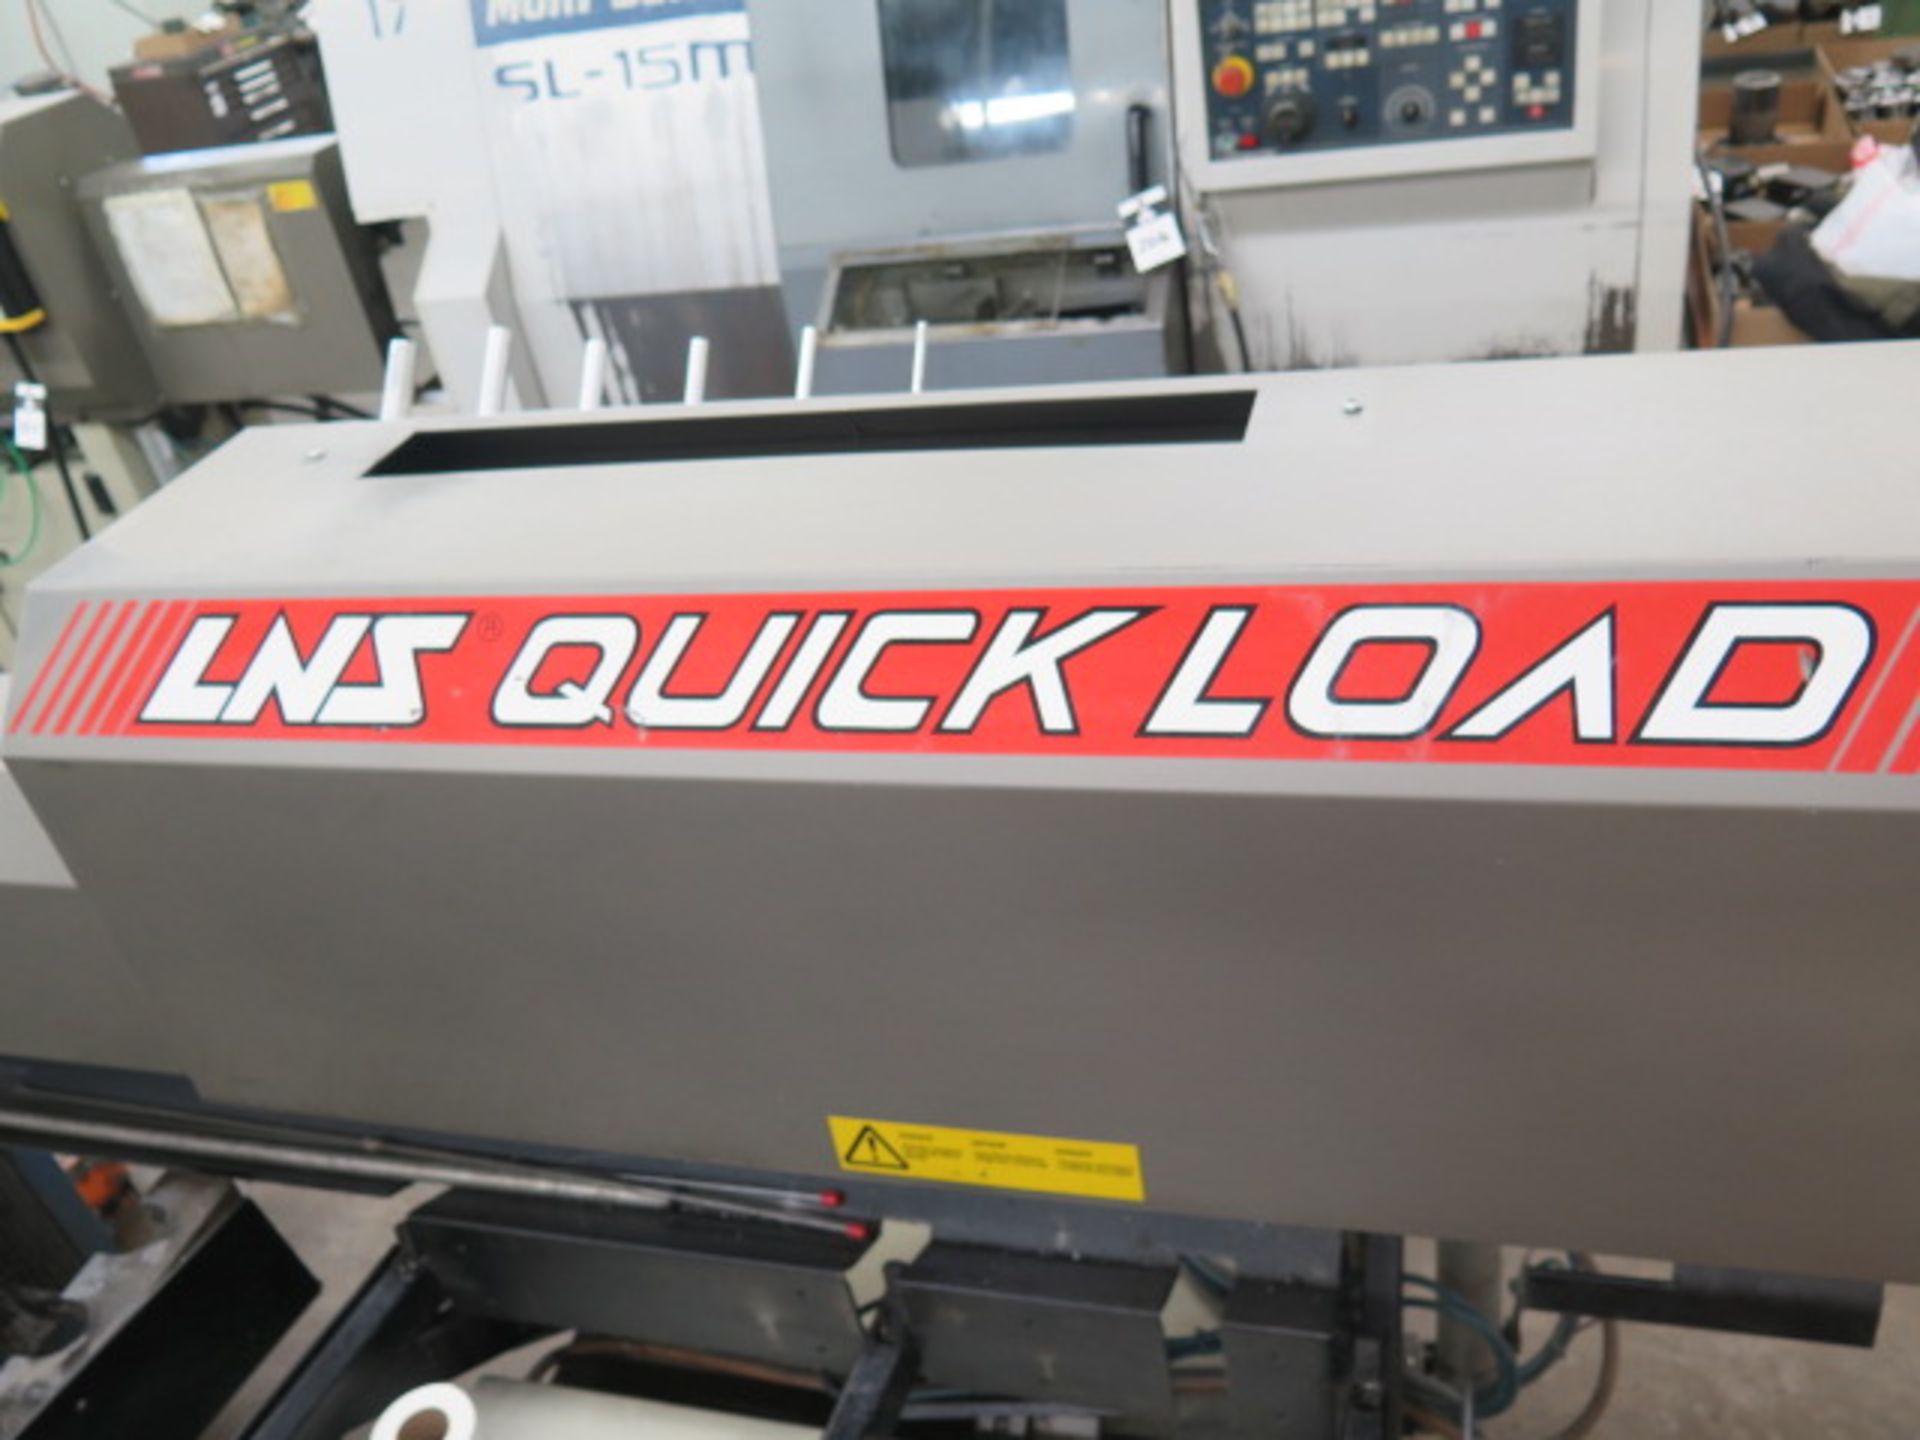 LNS Quick Load Automatic Bar Loader / Feeder (SOLD AS-IS - NO WARRANTY) - Image 5 of 5